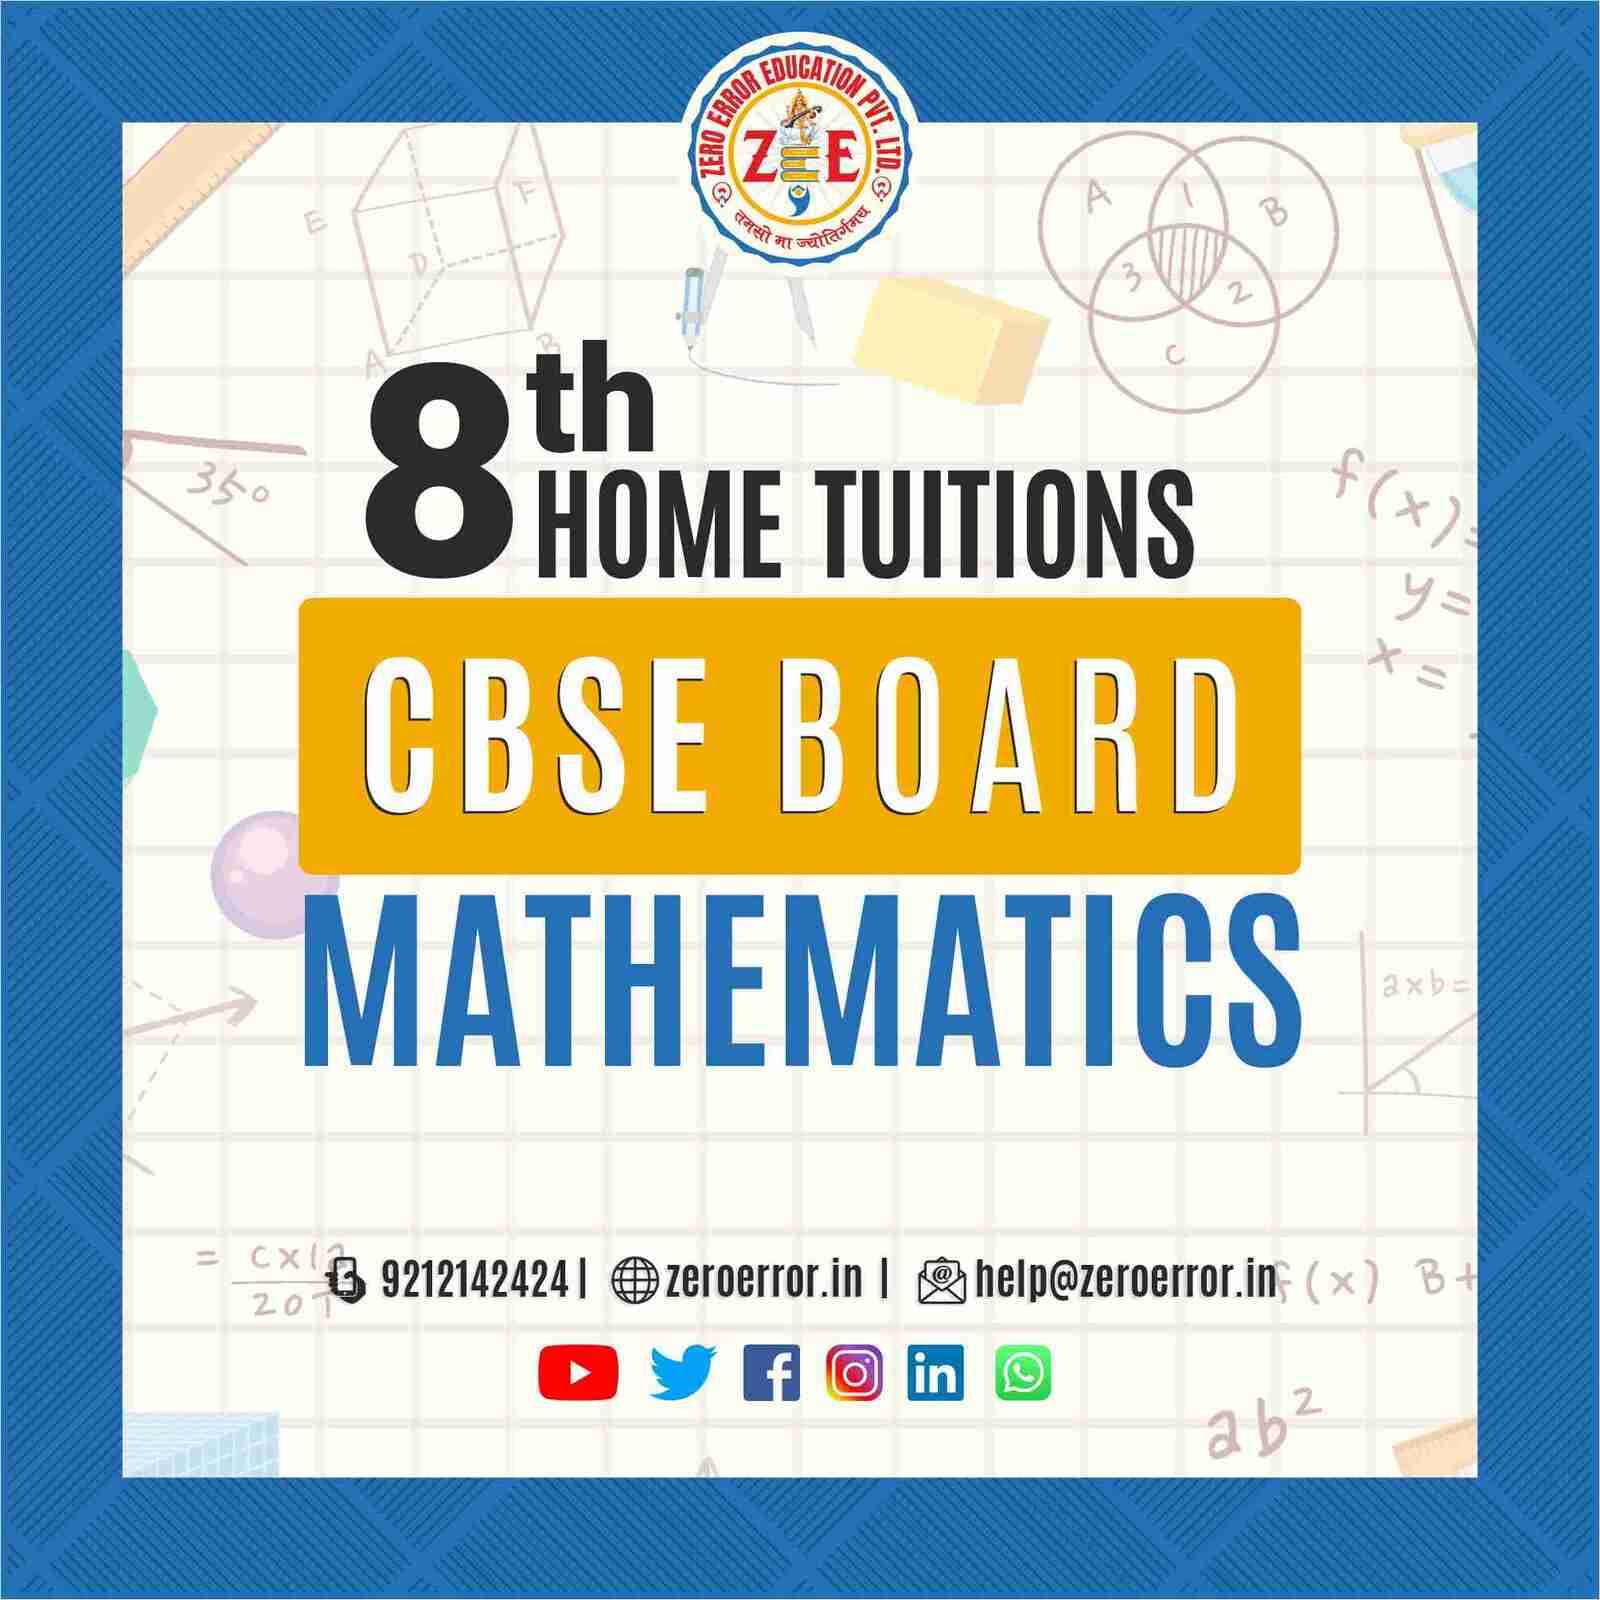 8th Grade CBSE Math's Online Classes by Zero Error Education Prepare for your CBSE board exams with online and offline SST classes for 8th grade. Learn from experienced home tutors and get all the help you need to succeed. Enroll today at Zero Error Education. [https://zeroerror.in/] Call 9212142424 for more information.